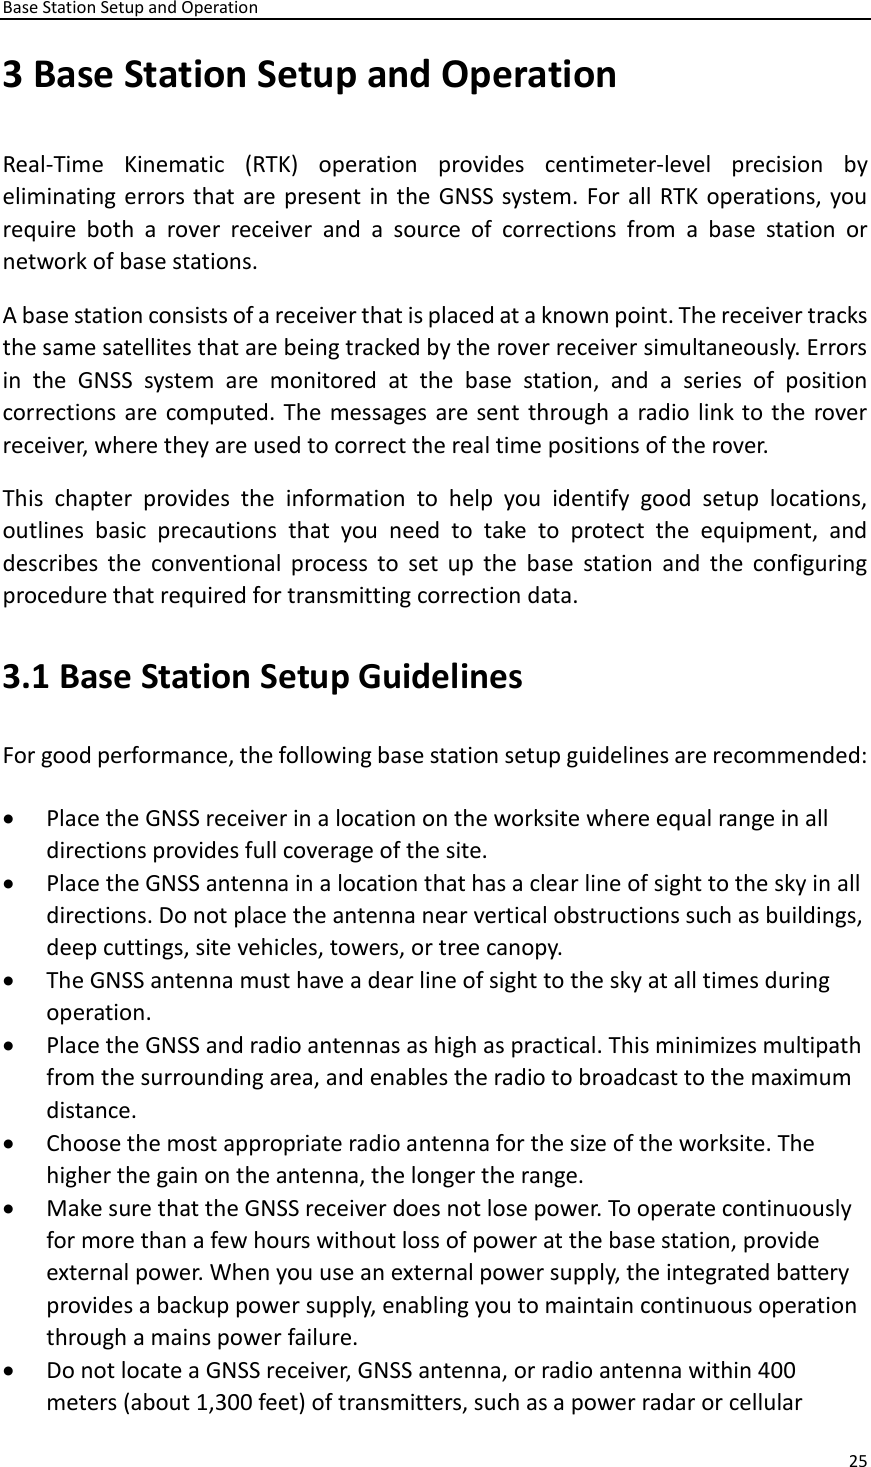 Page 25 of Huace Navigation Technology A01014 Geodetic GNSS Receiver i50U User Manual 